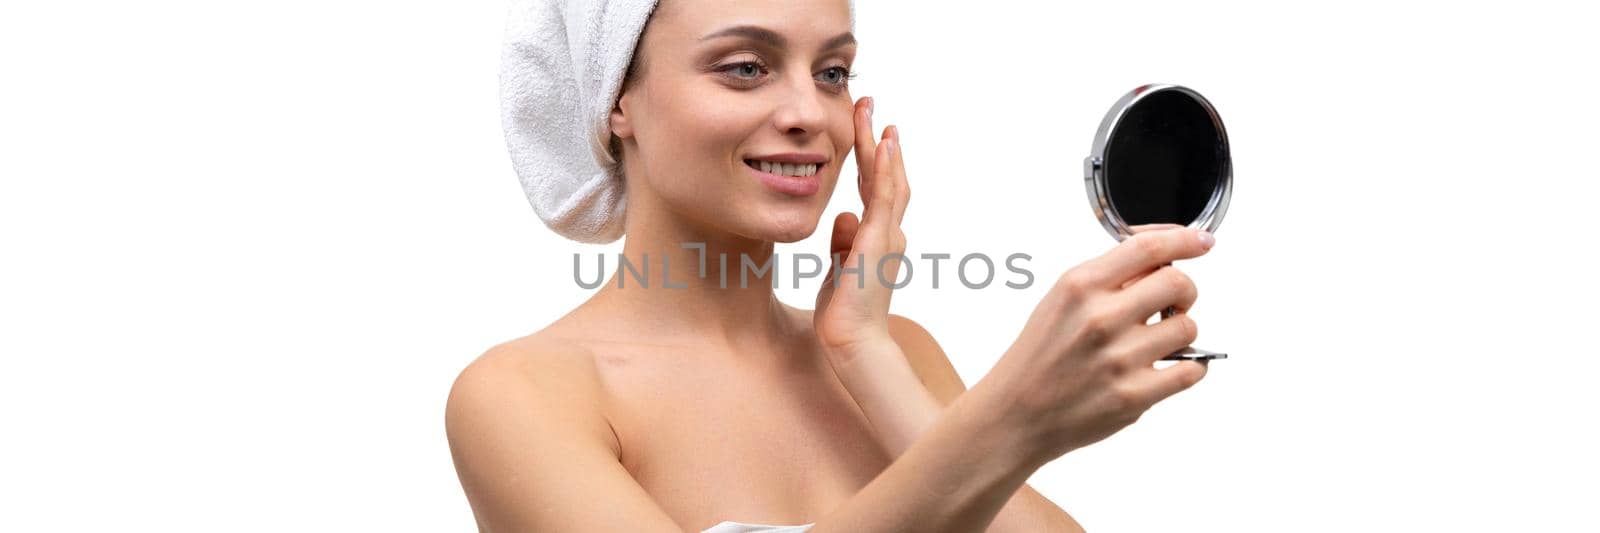 a woman after a shower admires herself in a small mirror on a white background by TRMK